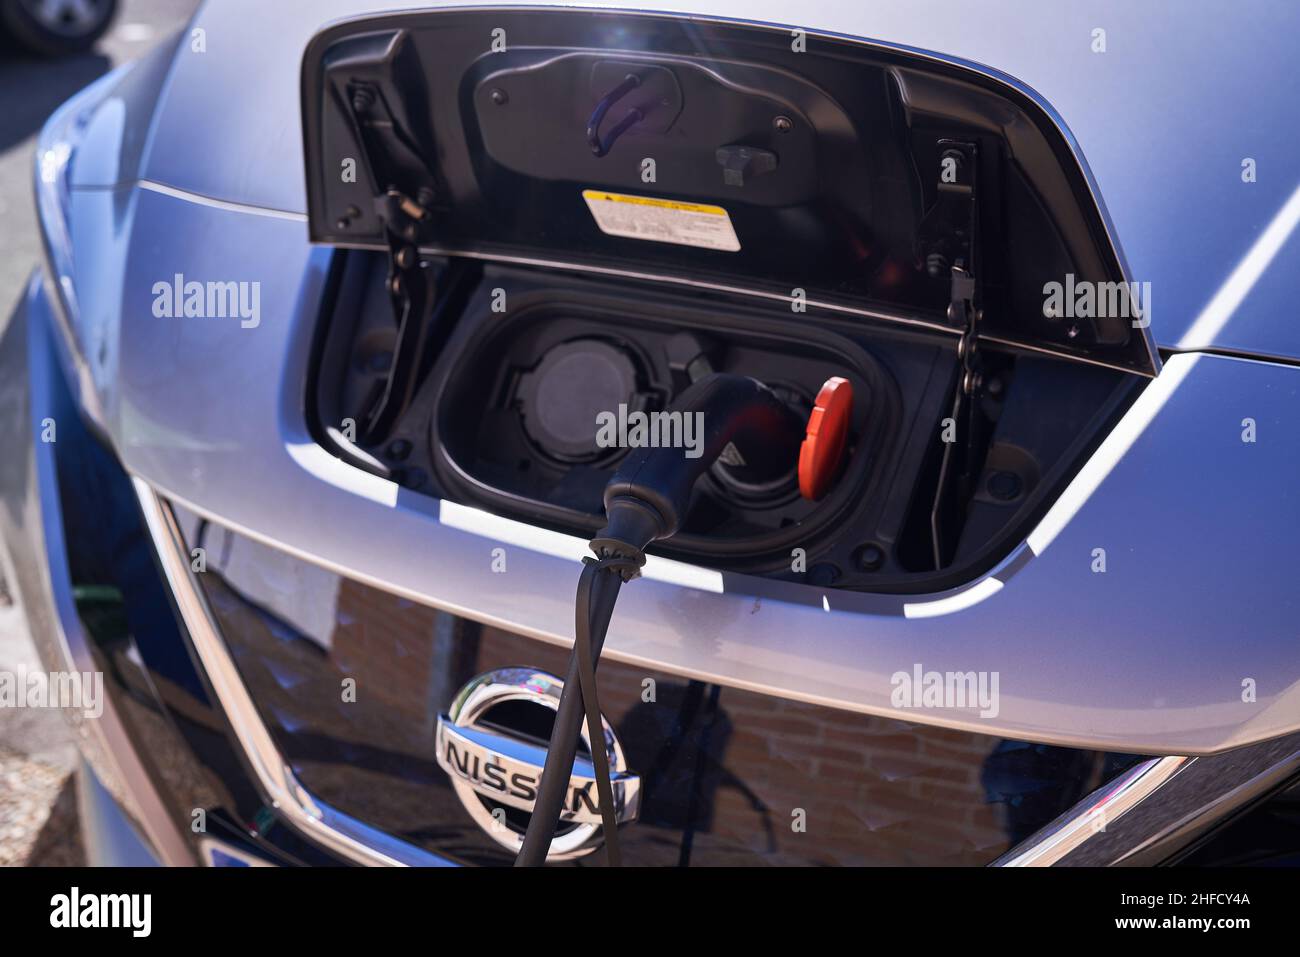 PAMPLONA, NAVARRA SPAIN JANUARY 13 2022: Electric car charging next to charging station Stock Photo